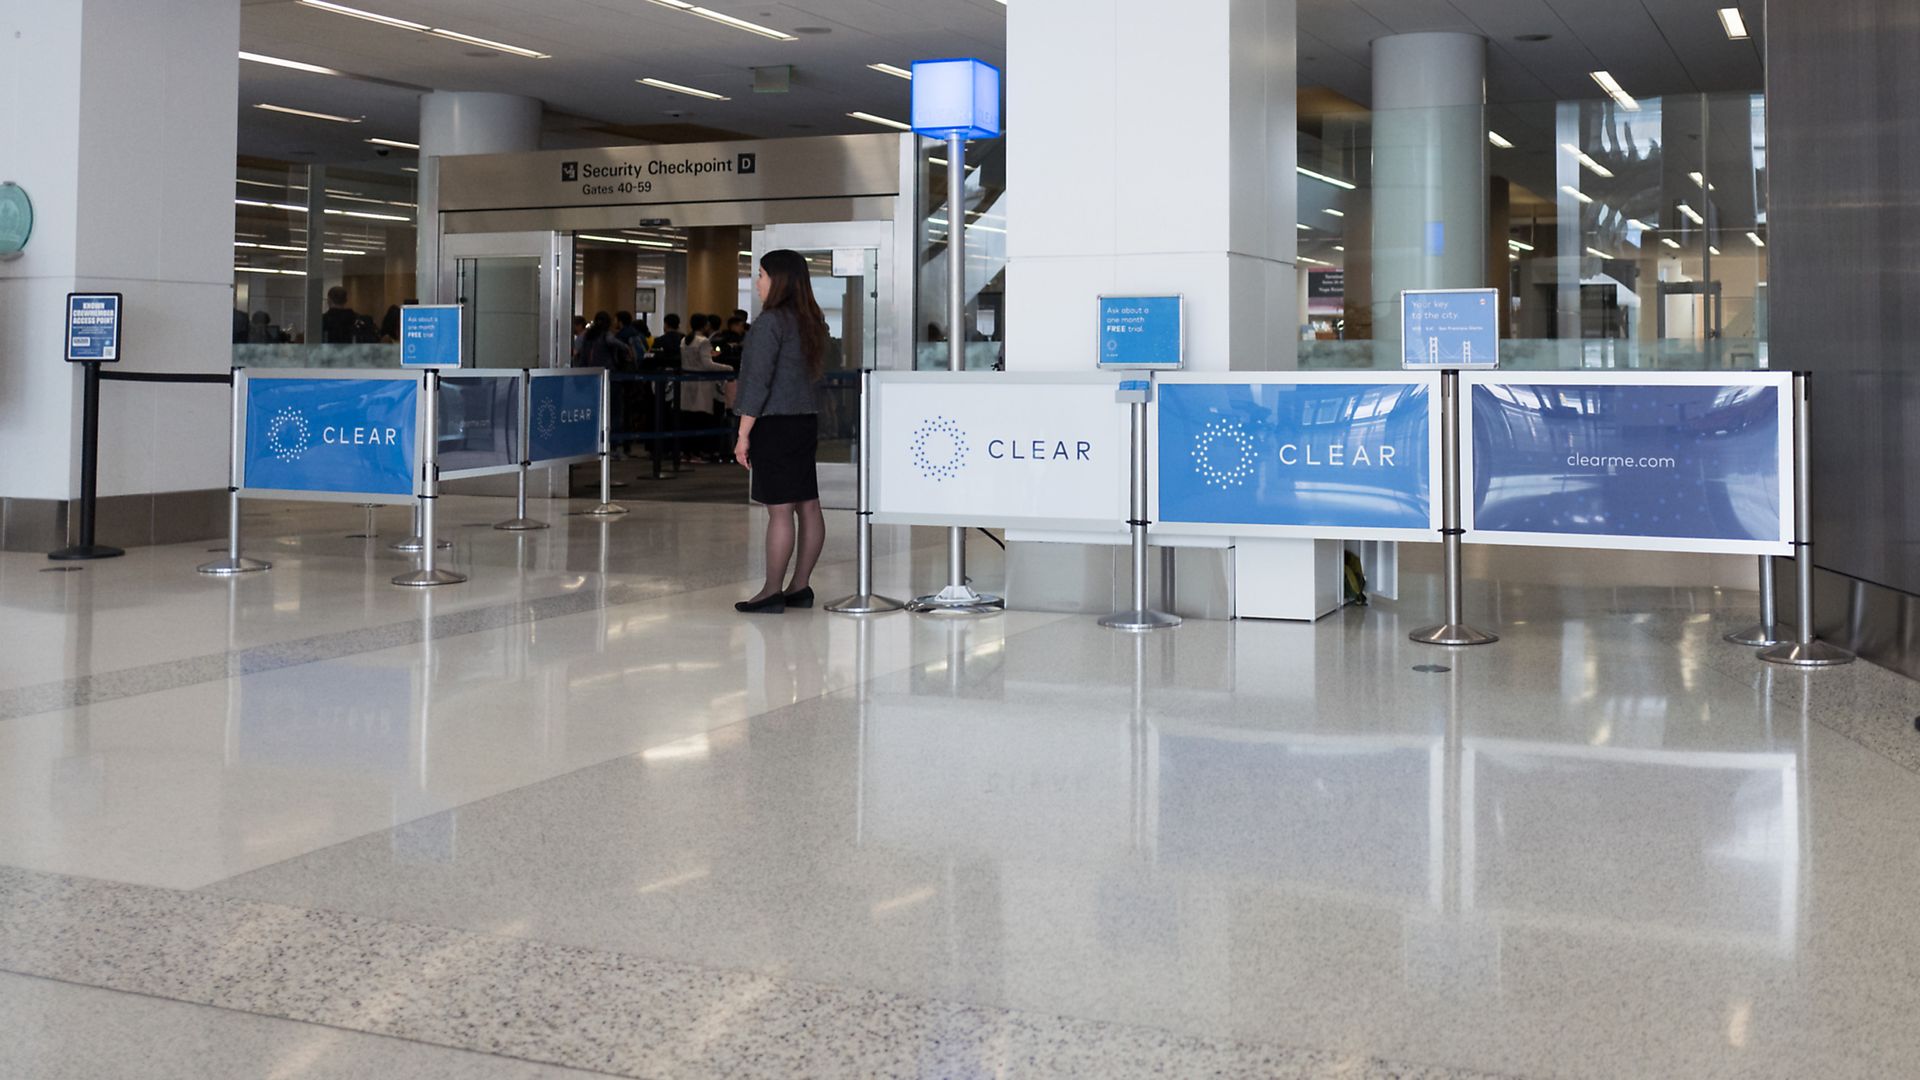 Image of CLEAR airport security checkpoint